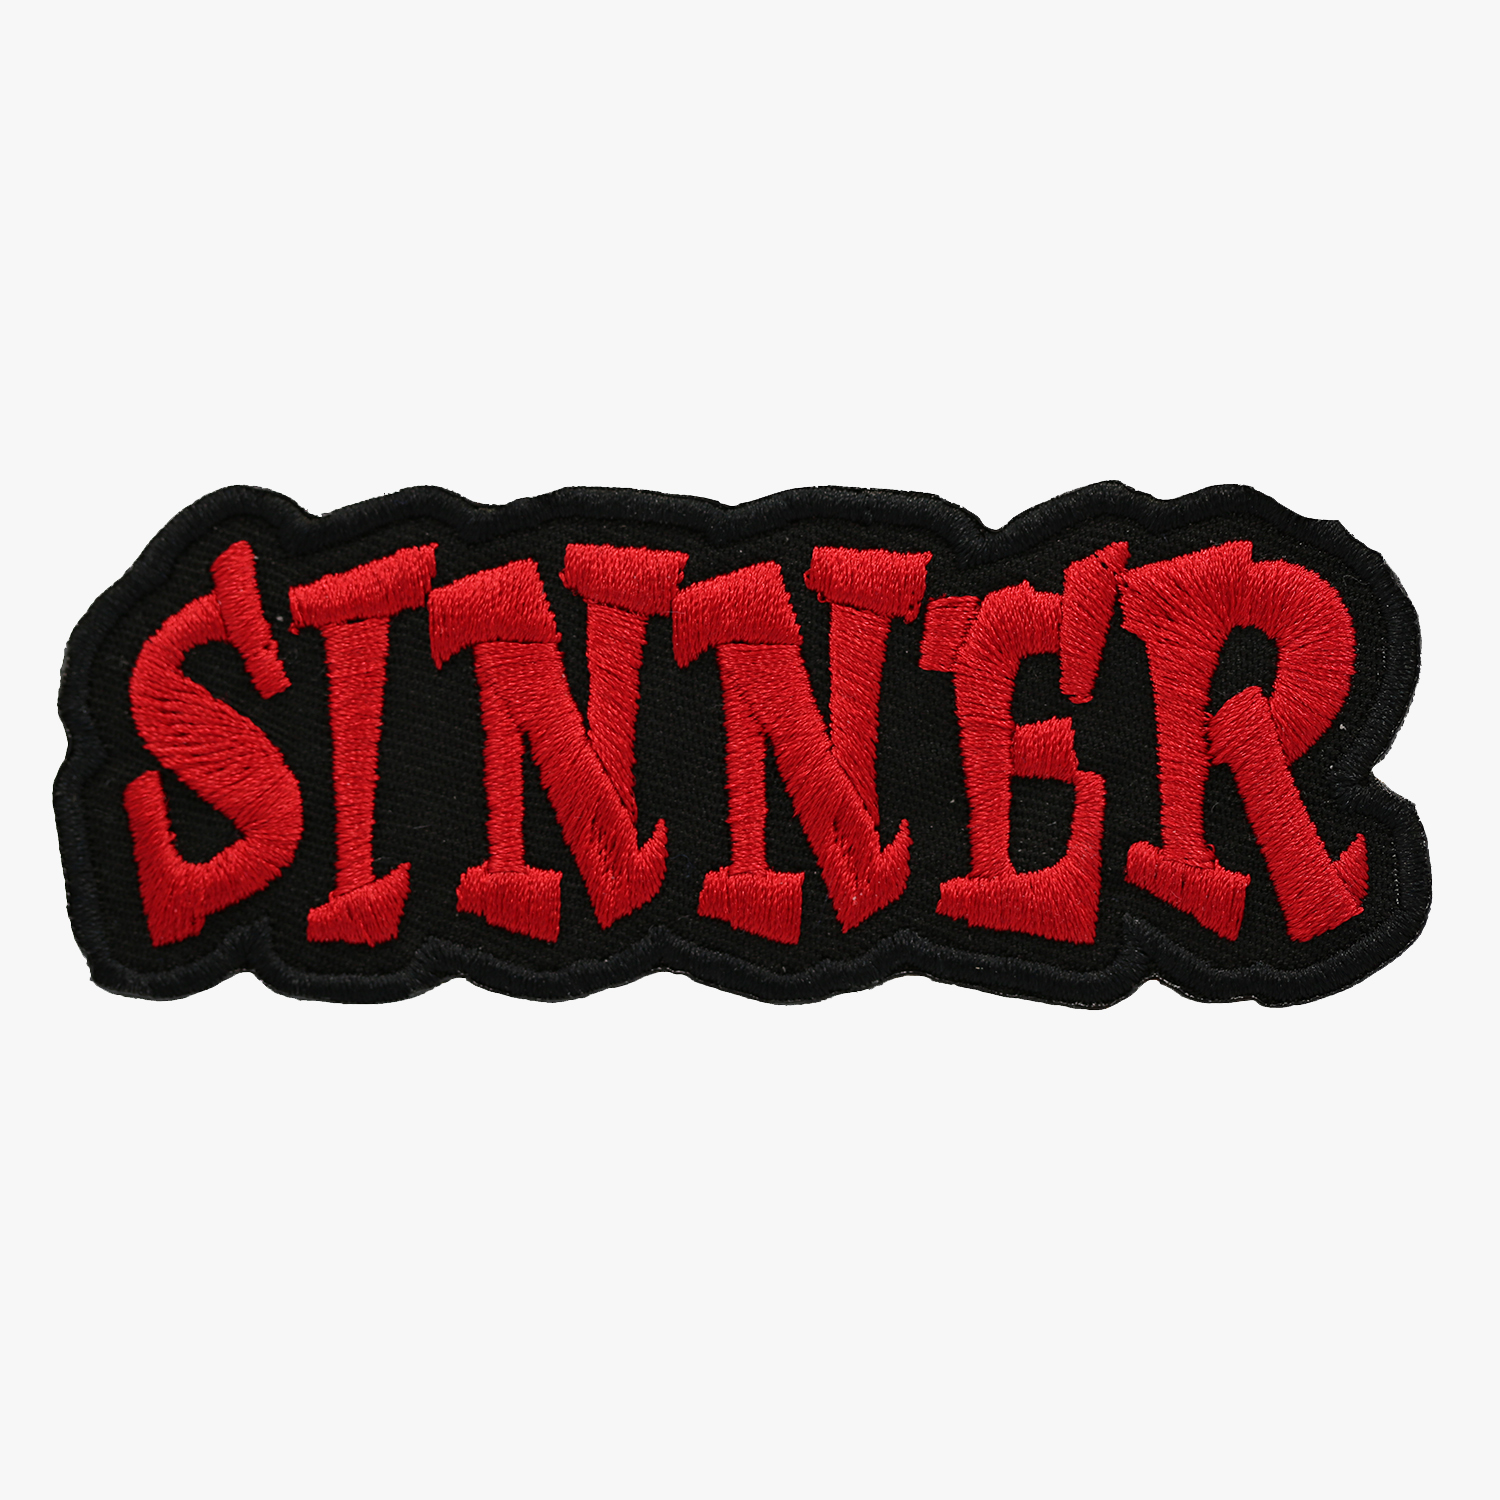 Sinner Embroidered Patch 